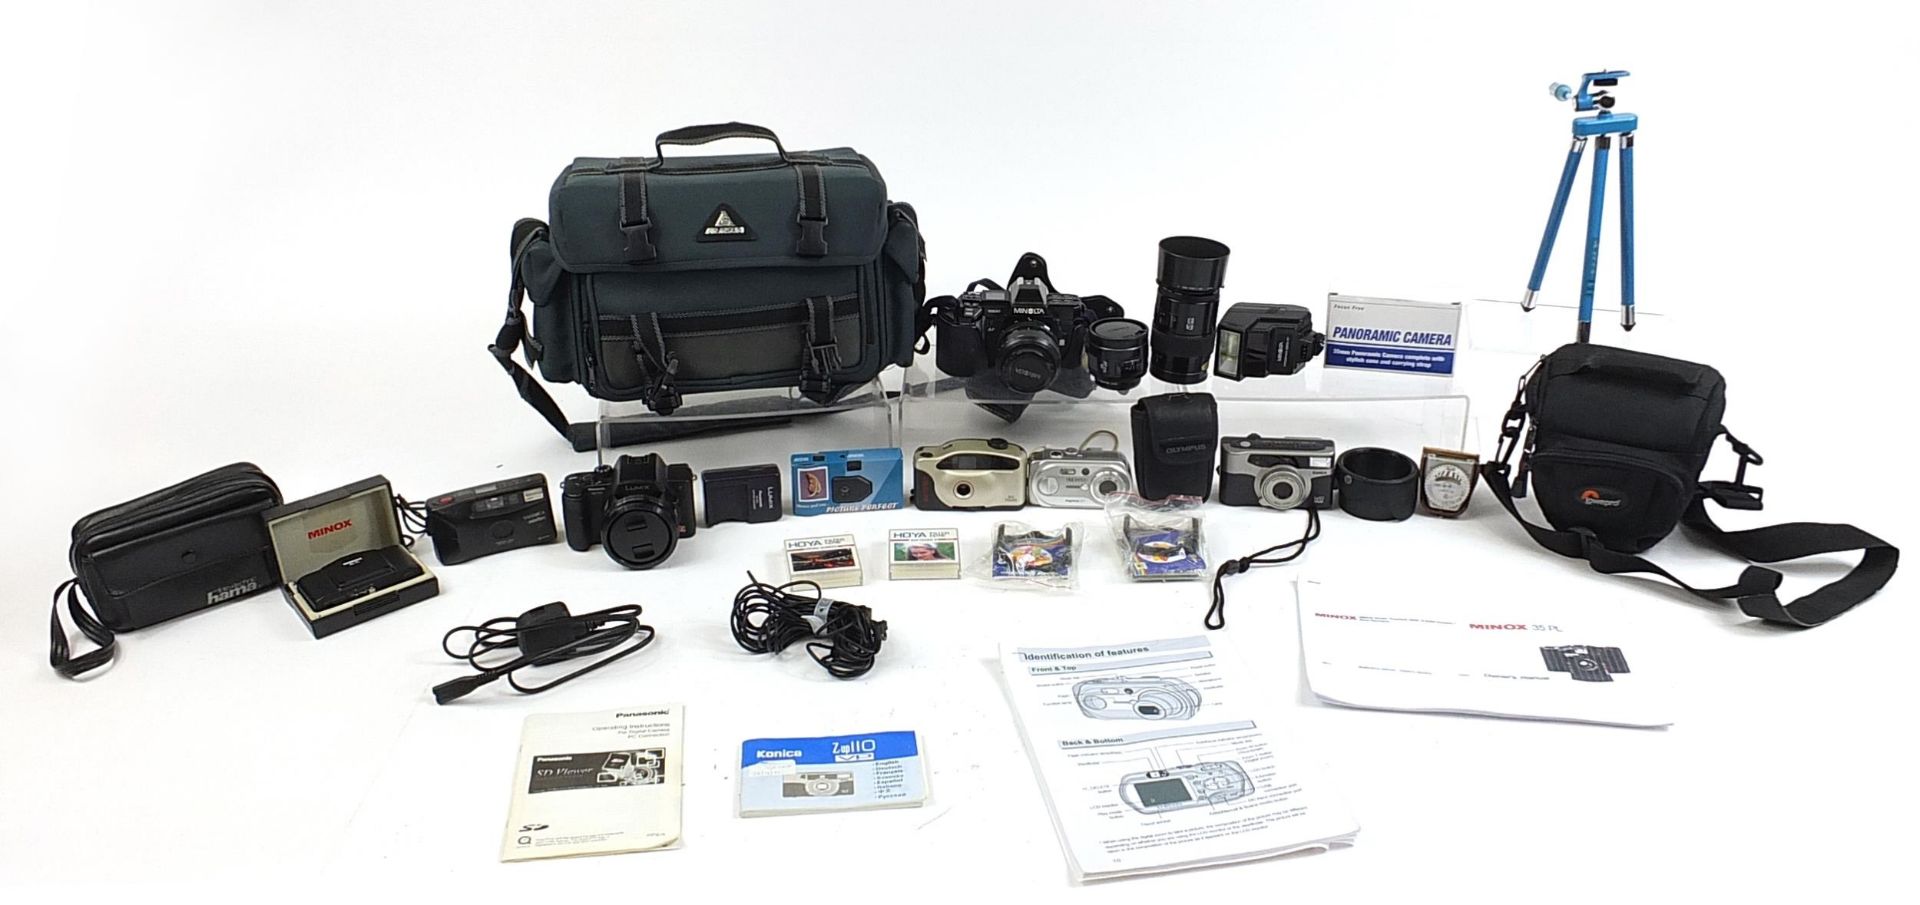 Vintage and later cameras, lenses and accessories including Minolta 7000 and Panasonic Lumix DMC-